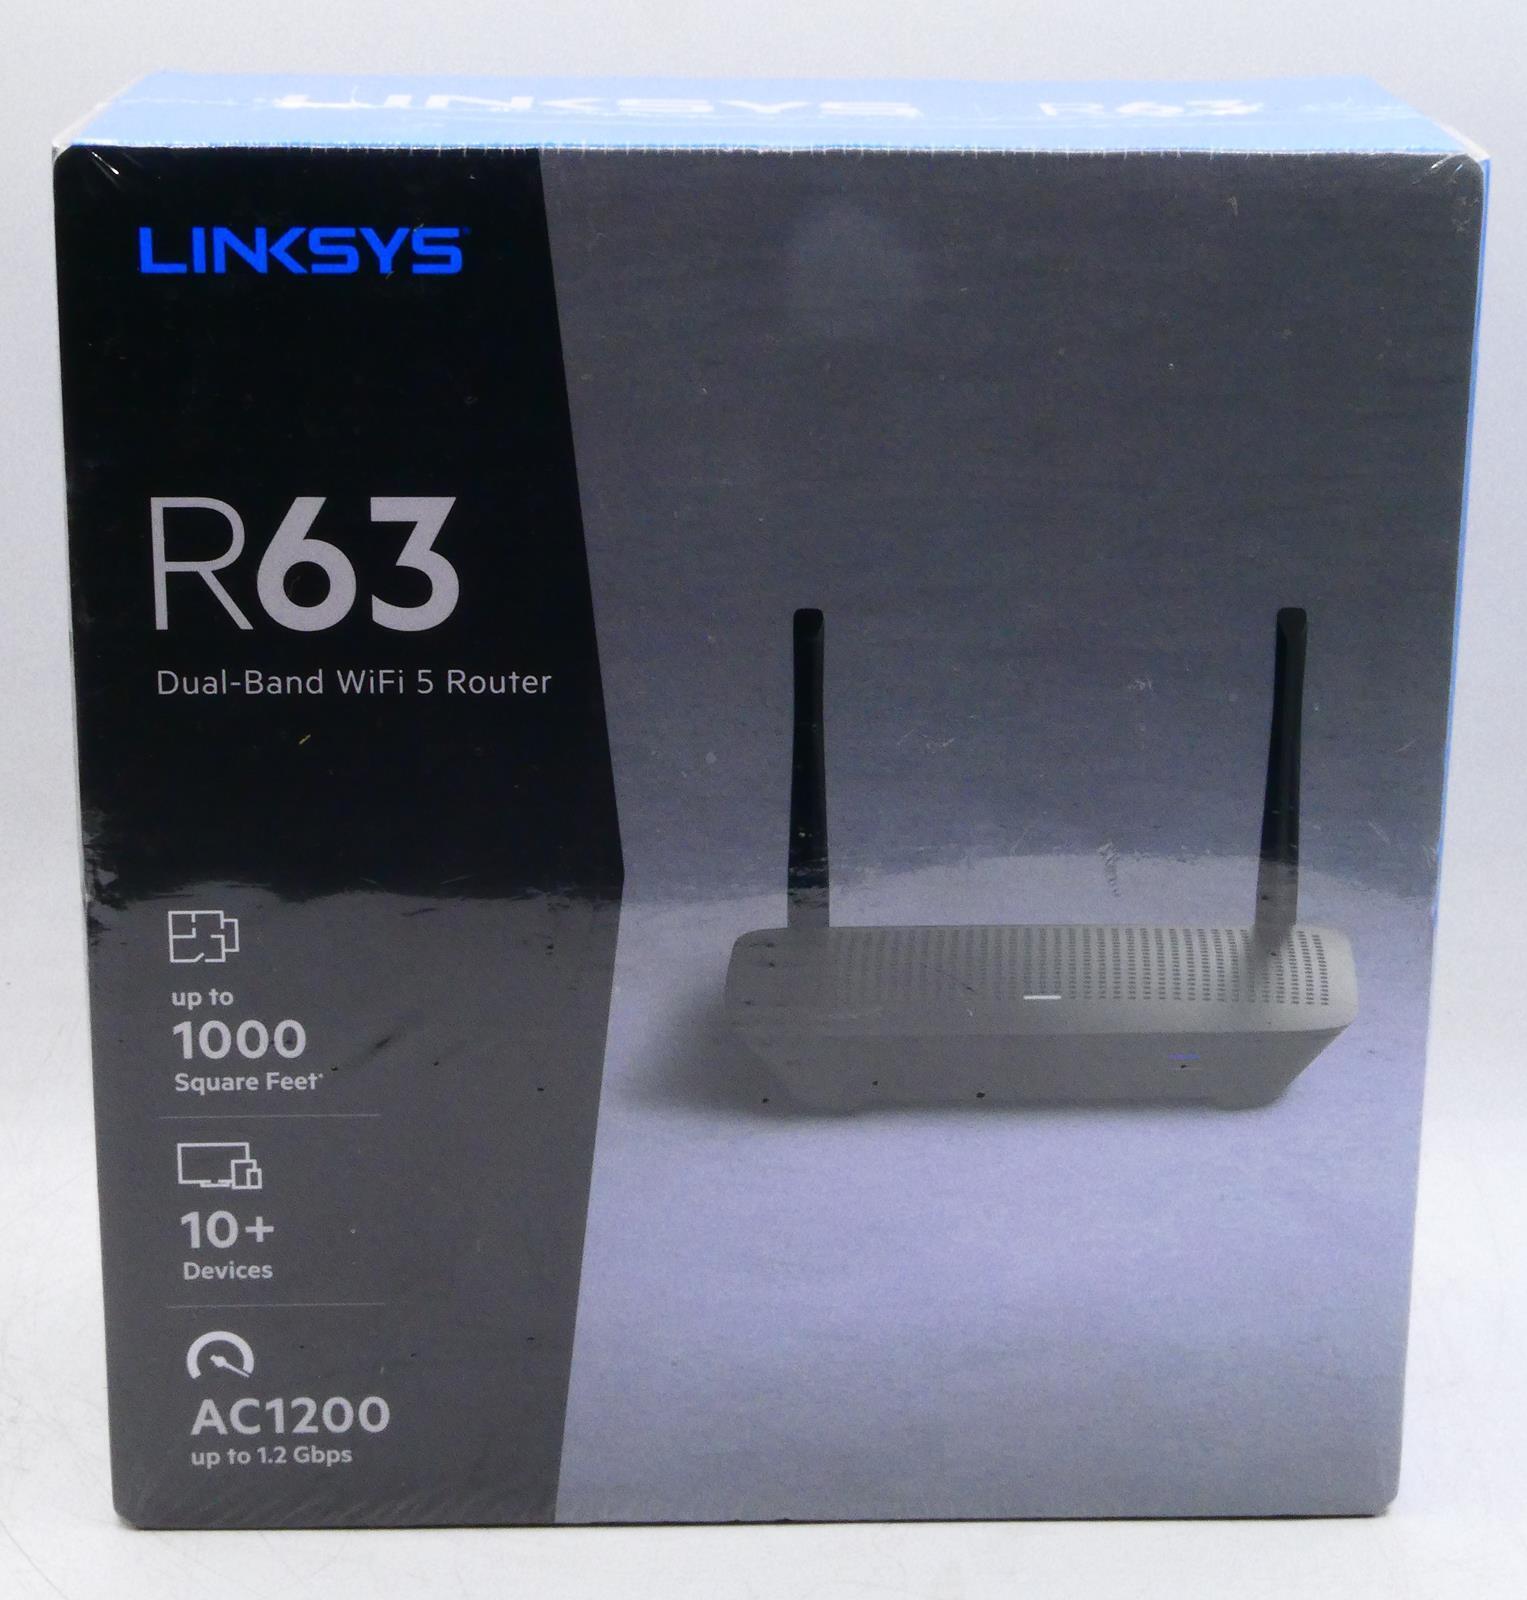 NEW & SEALED - LINKSYS EA6350-4B V4 AC1200 R63 DUAL-BAND WIFI 5 ROUTER #103566#